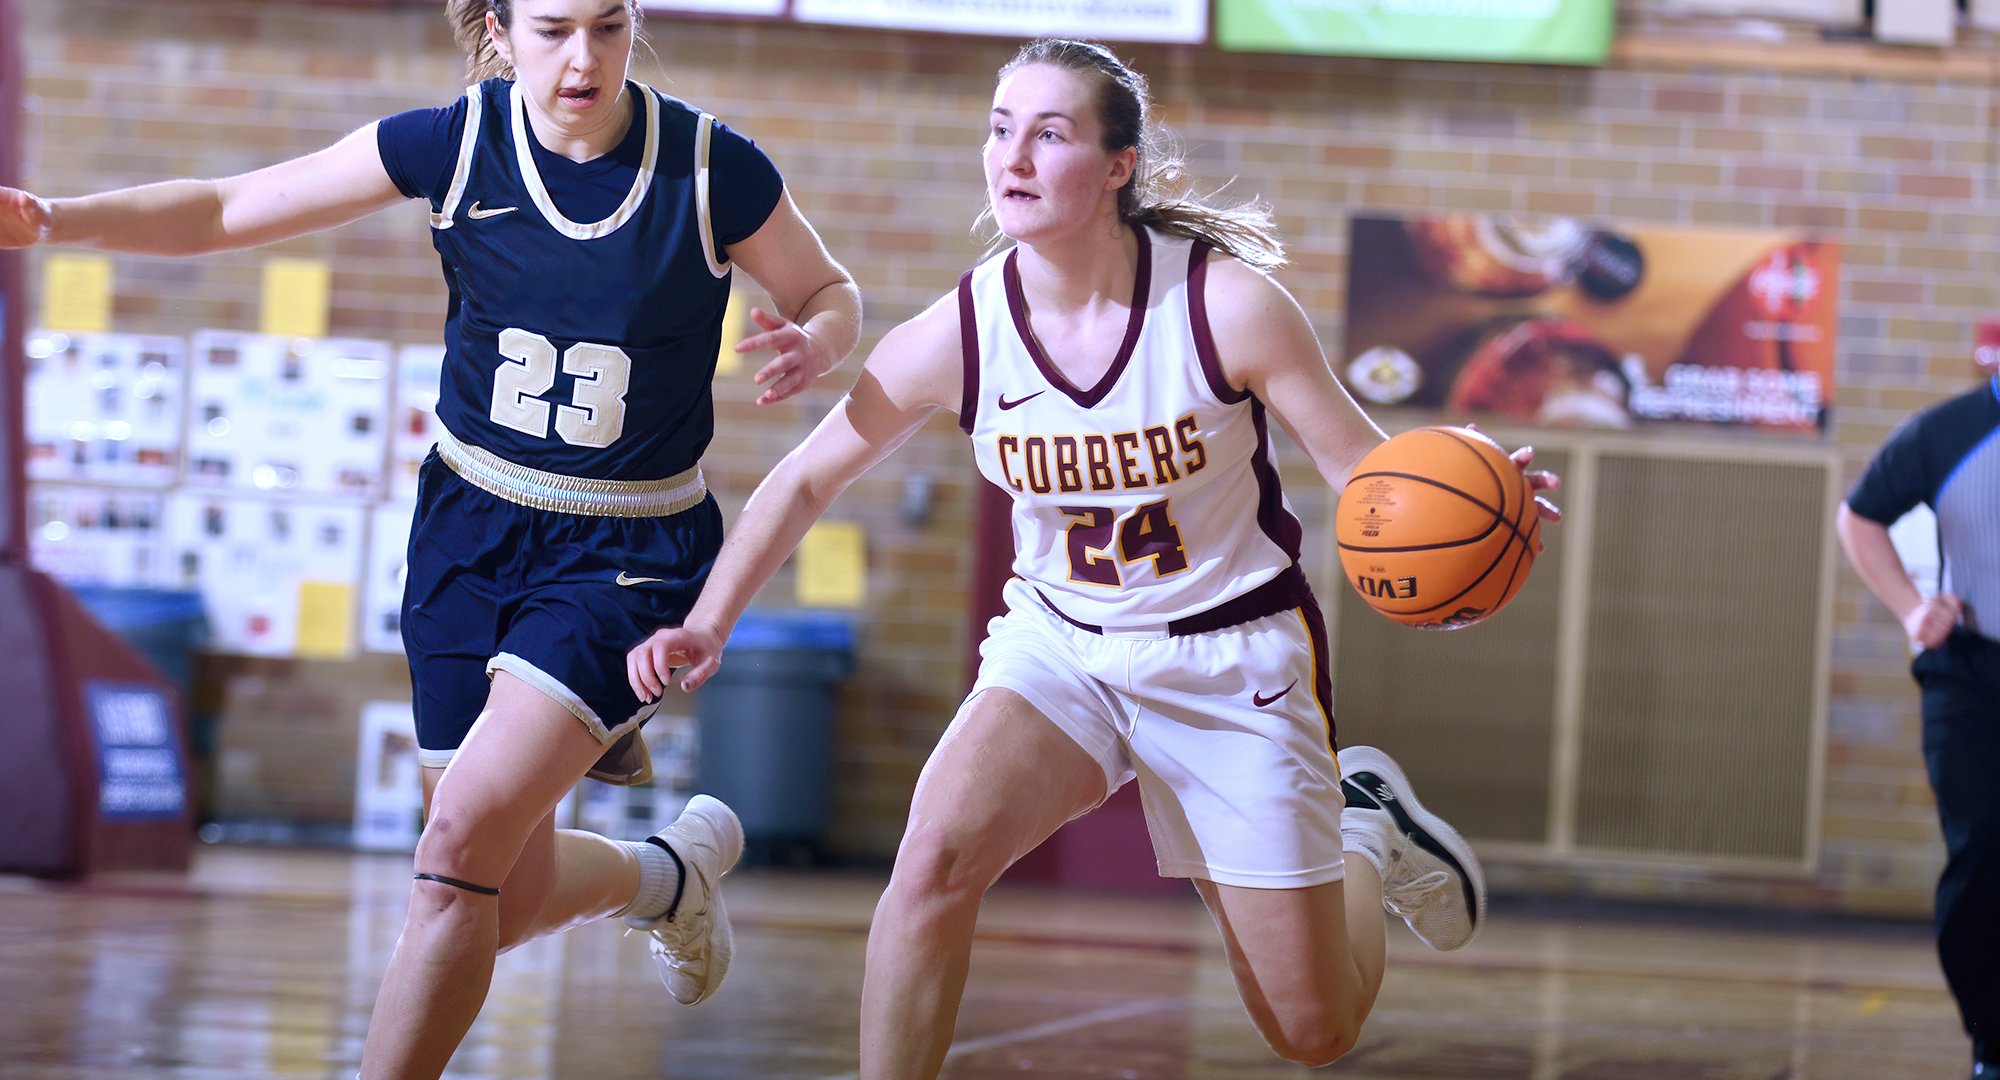 Junior guard Jordyn Kahler scored a career-high 19 points in the Cobbers' MIAC-opening win at St. Scholastica.